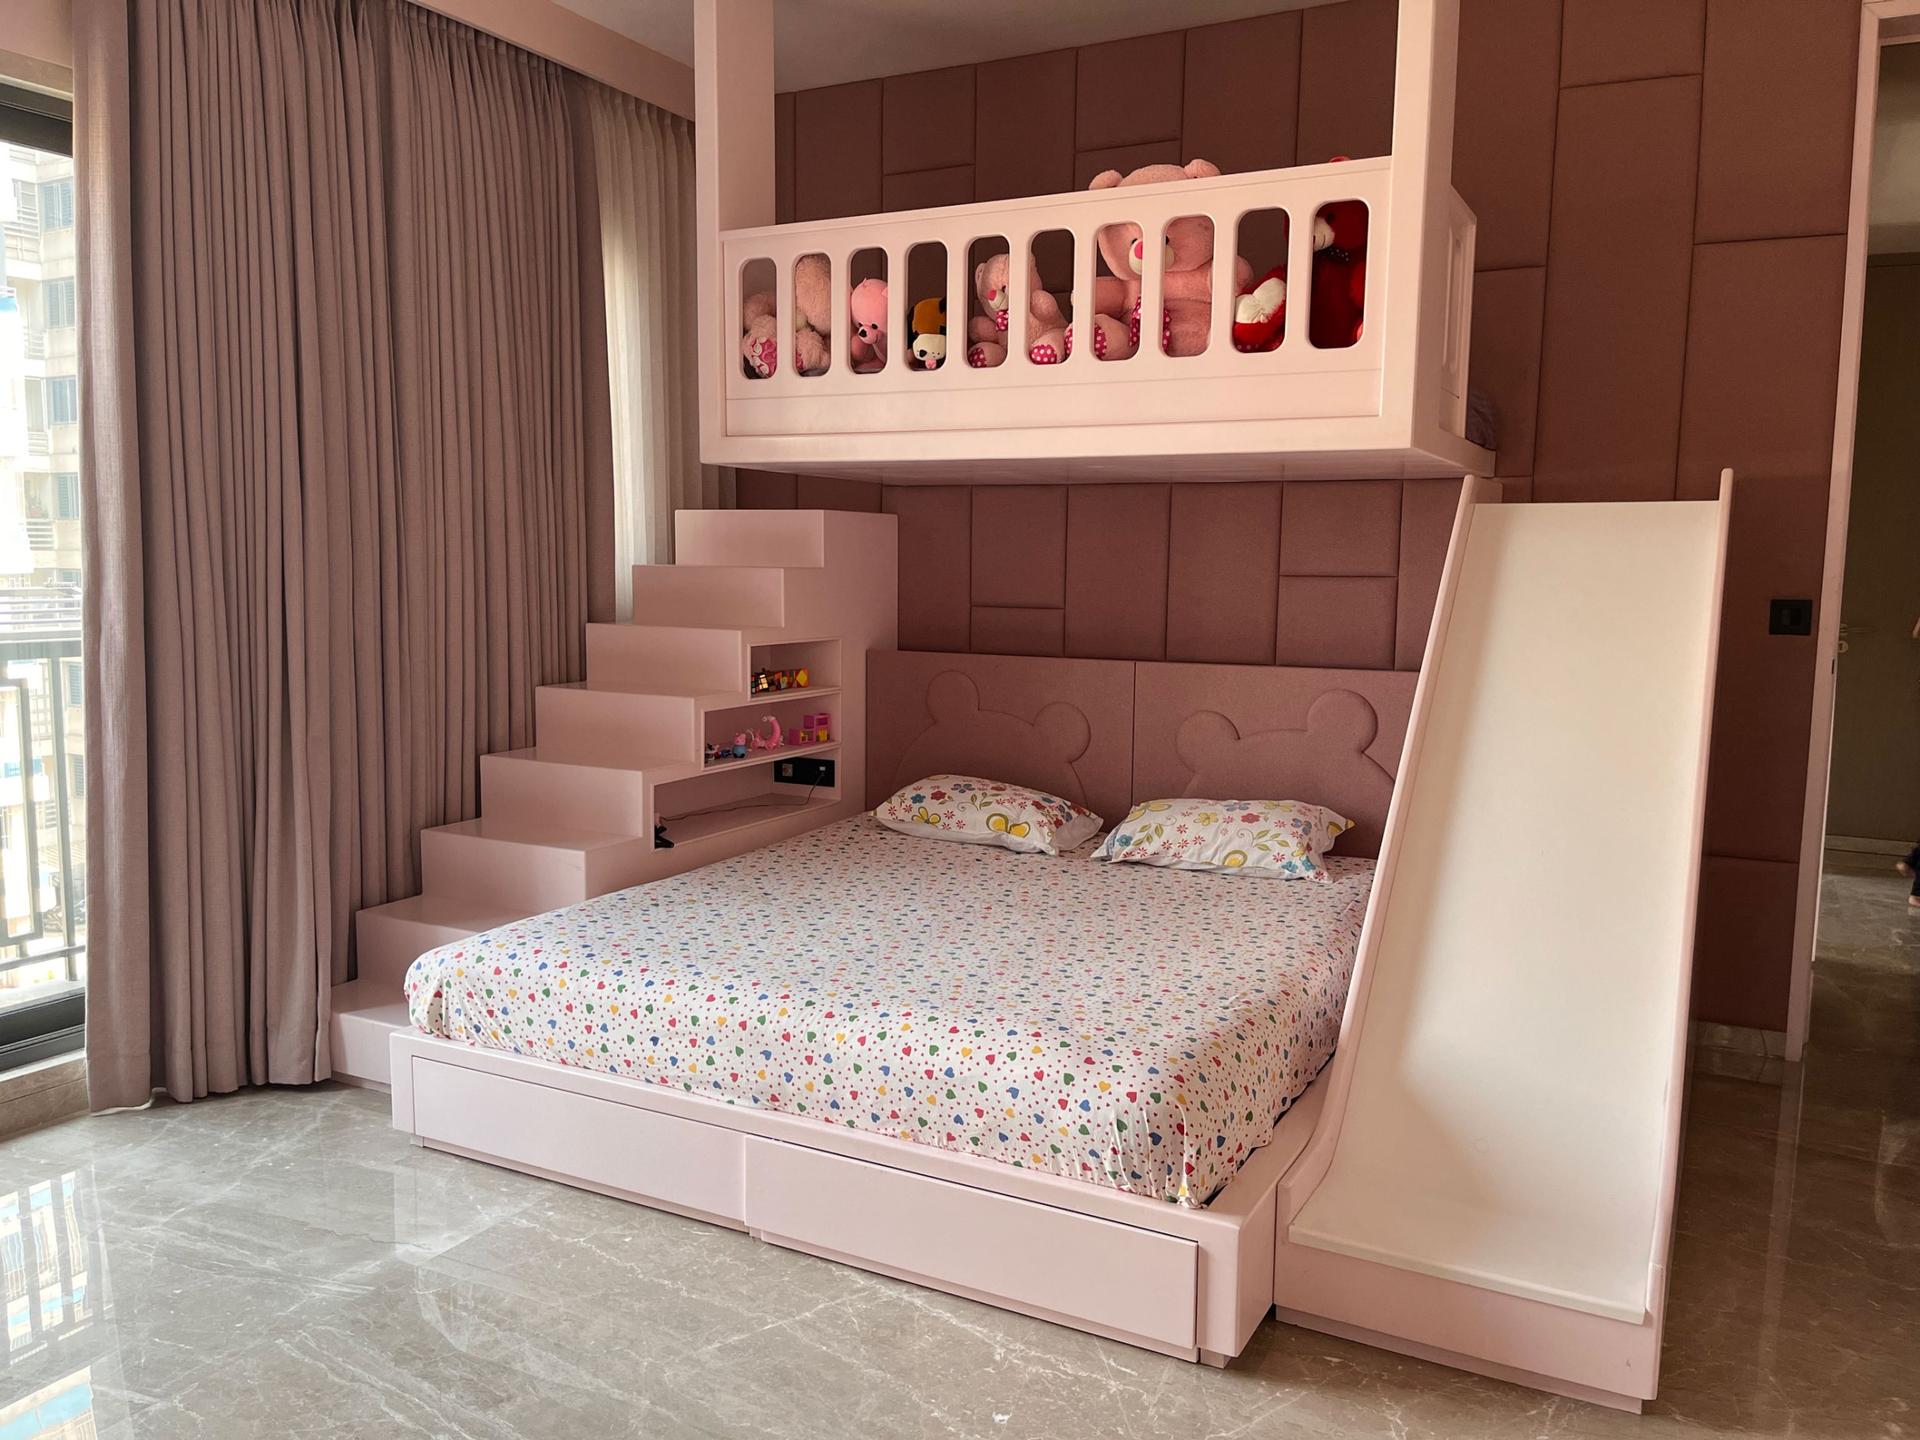 Devanshi Sanghvi, 8, designed her room meticulously, picking everything from the pink drapes to the pink slide. But before she could live in it, she renounced the world to become a Jain nun.